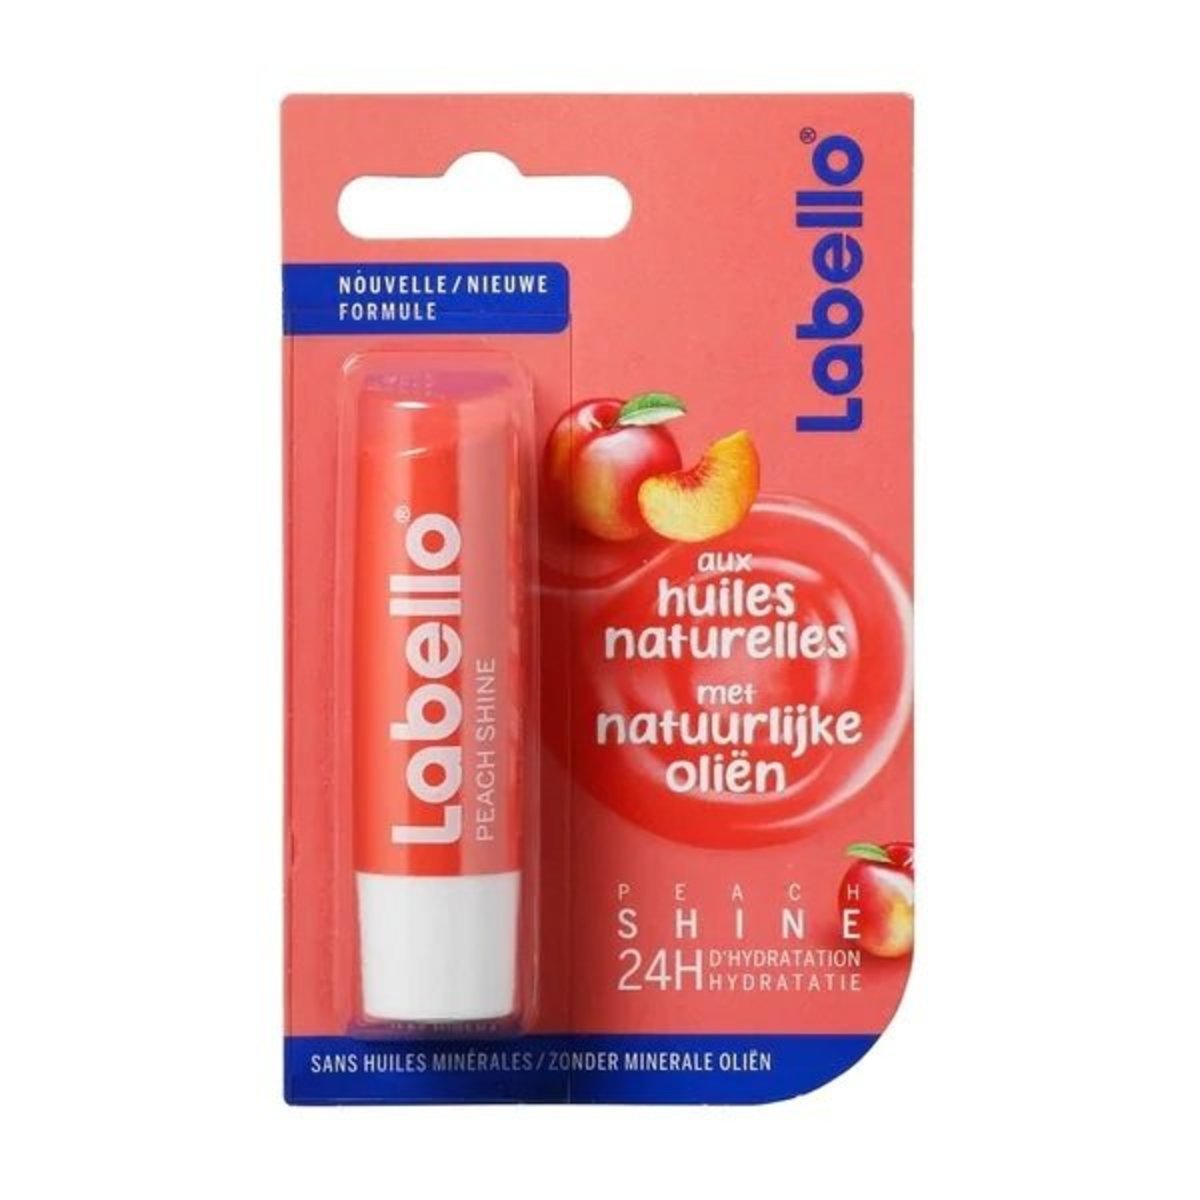 Europe Labello Classic Lip Care 5 5ml Peach Shine Parallel Import Product Hktvmall The Largest Hk Shopping Platform